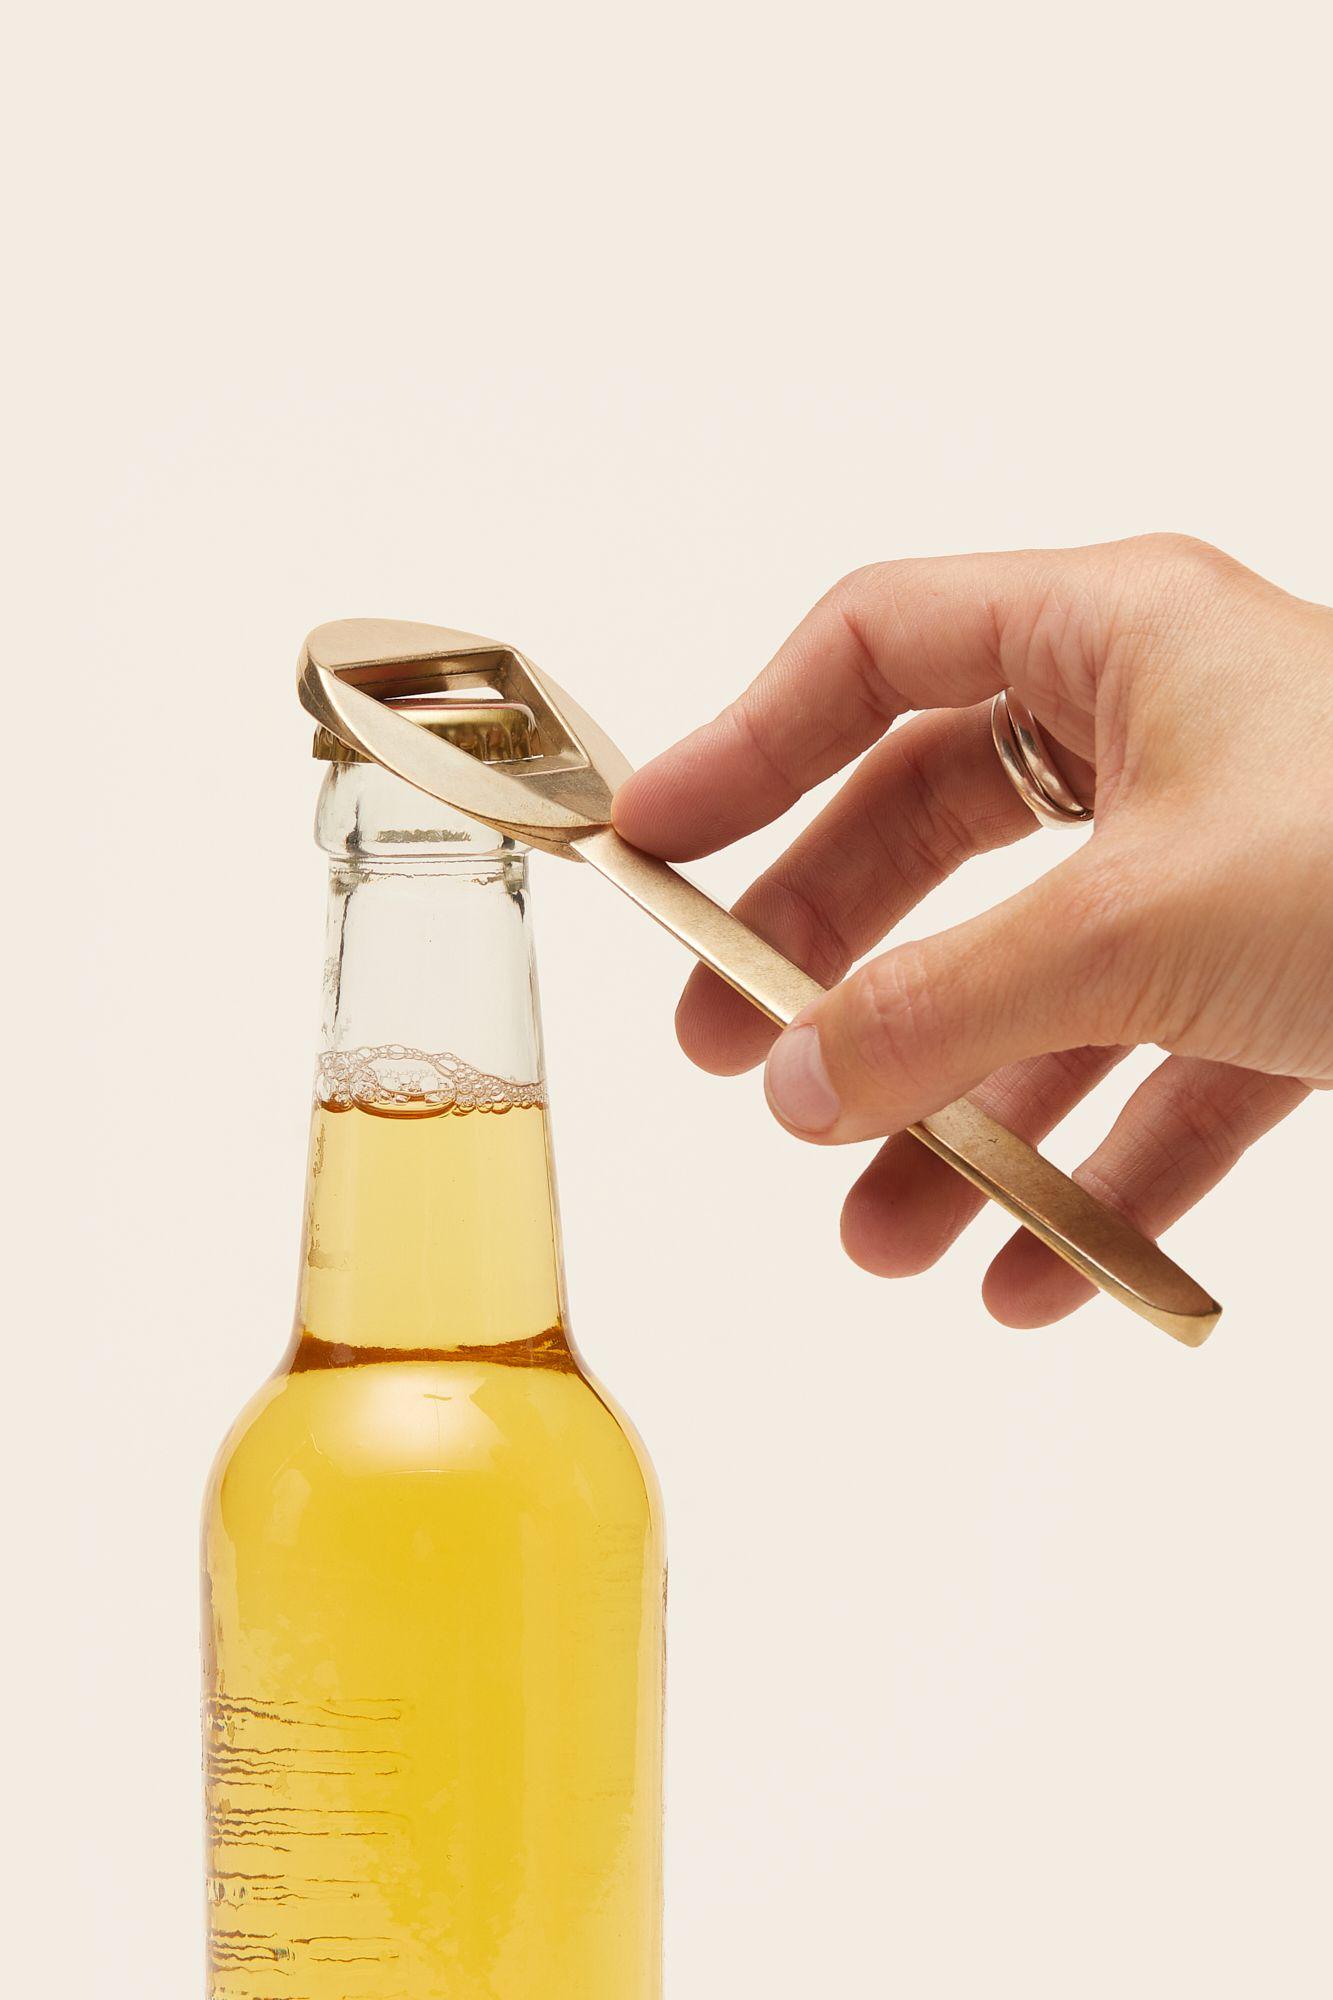 MERCHERY_MAY-2022_Craighill bottle opener_in situation (1).jpg